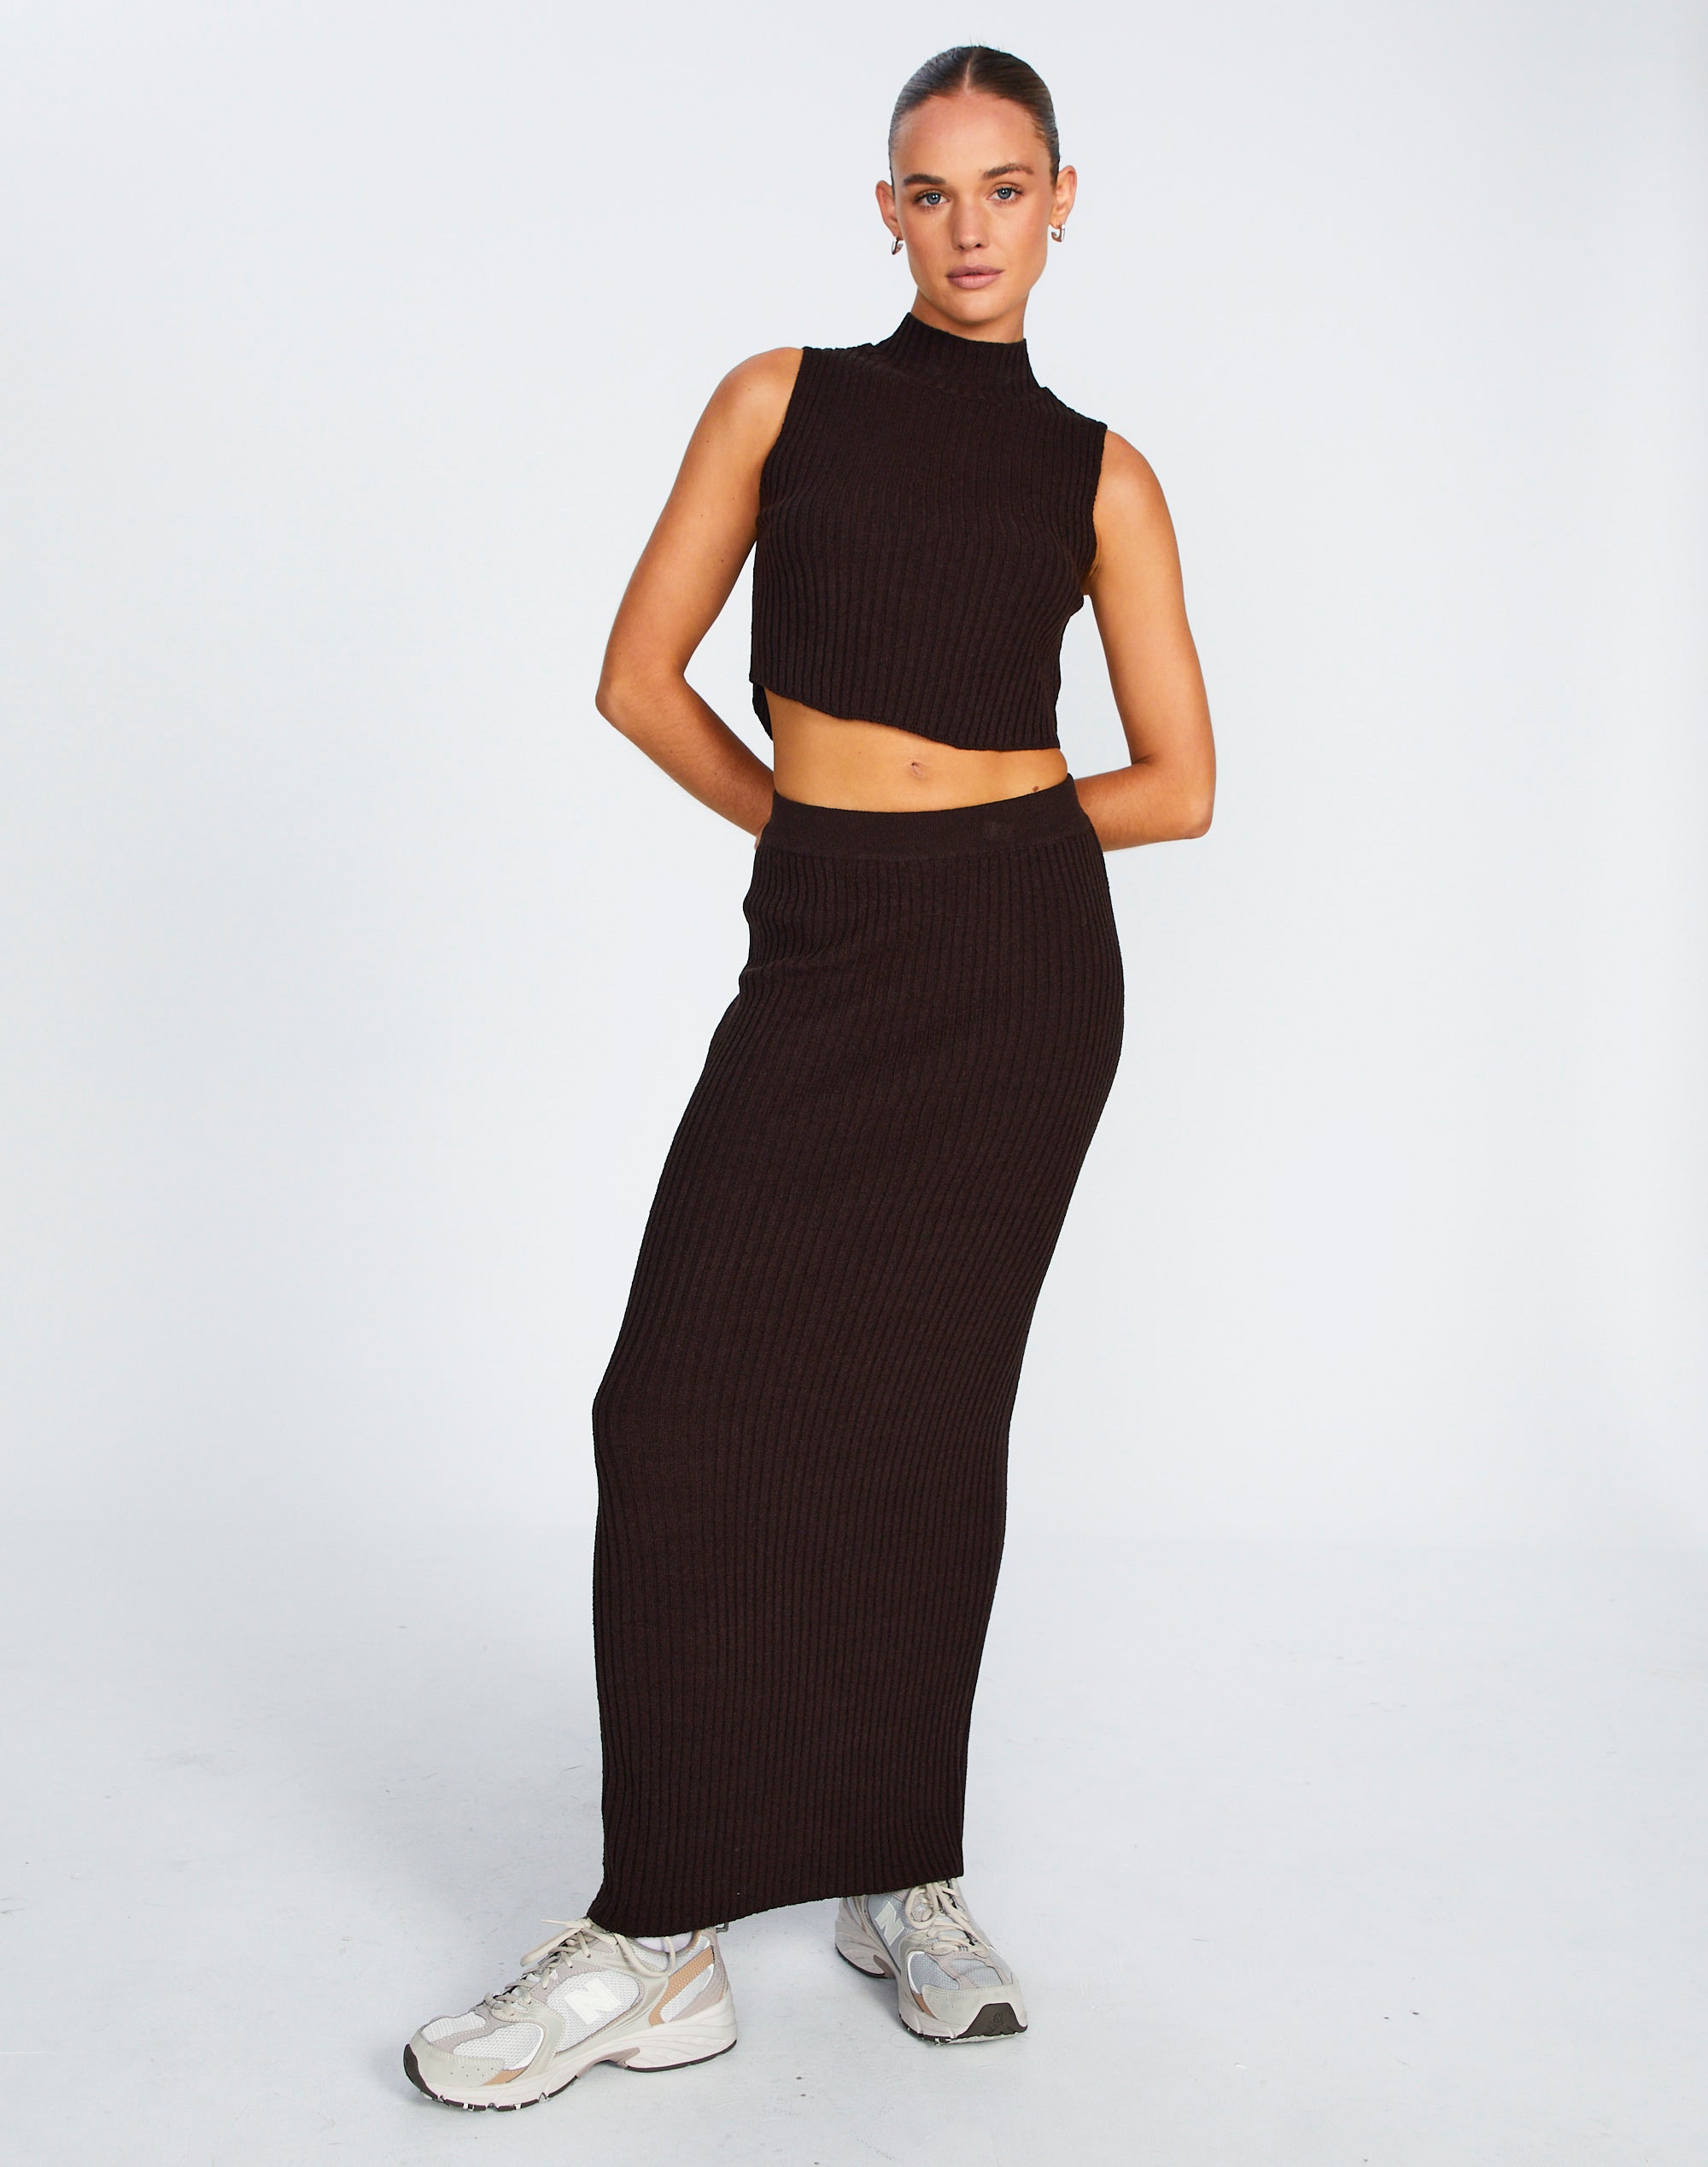 Update 71+ ribbed knit maxi skirt